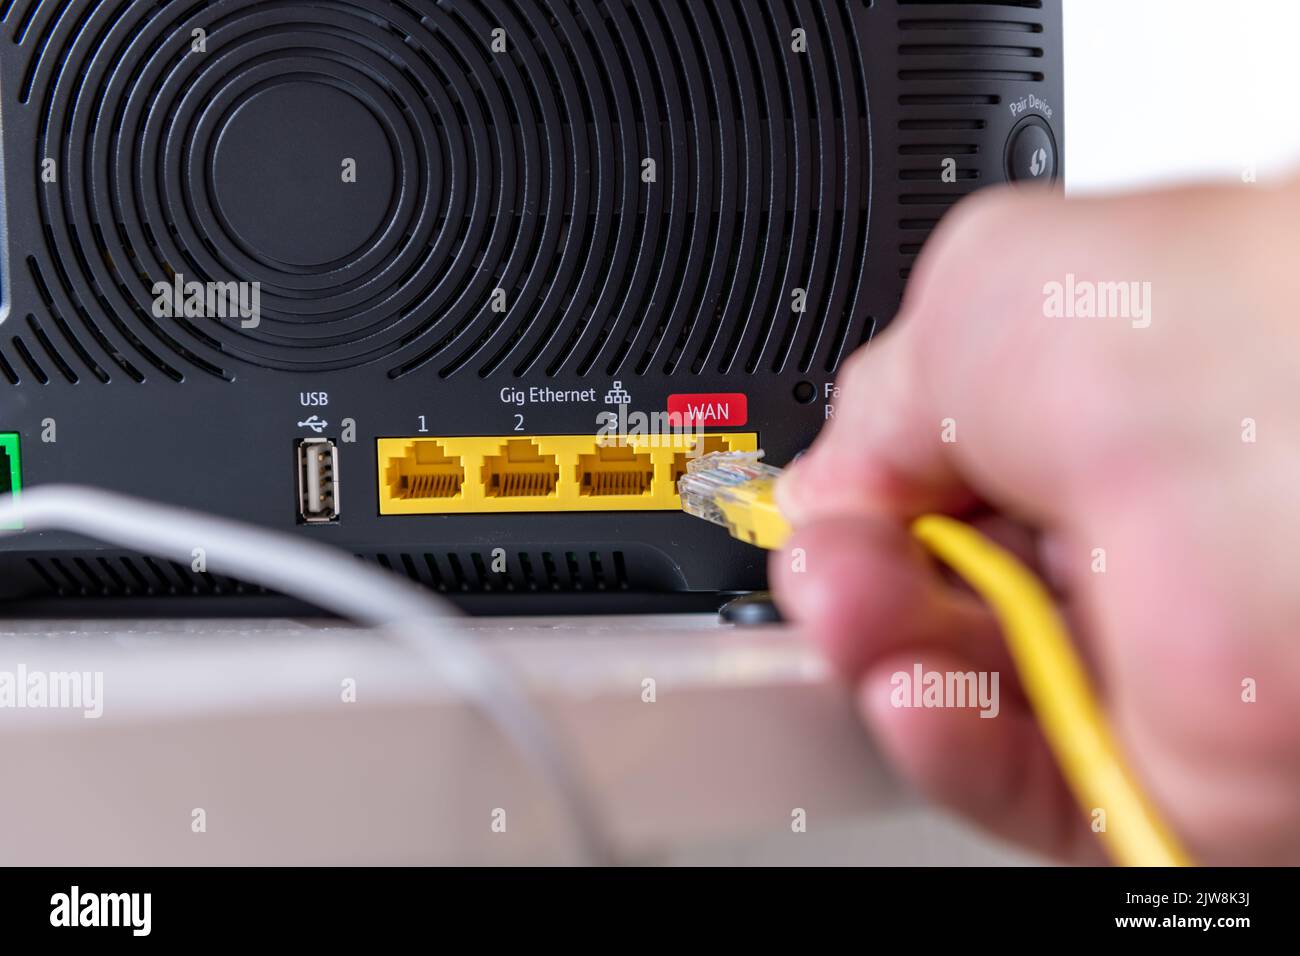 A person connecting a device to a internet router. Stock Photo